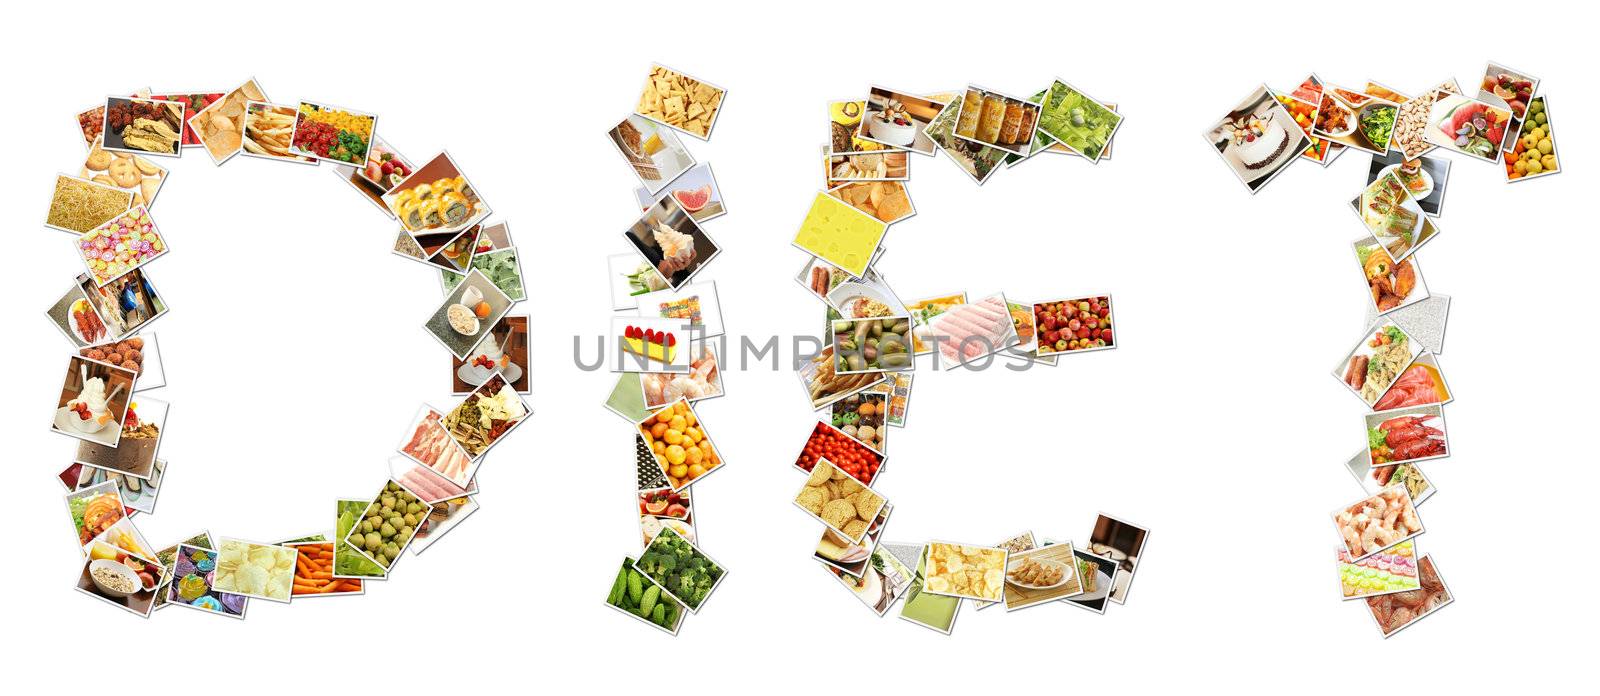 Healthy Diet Collage by kentoh